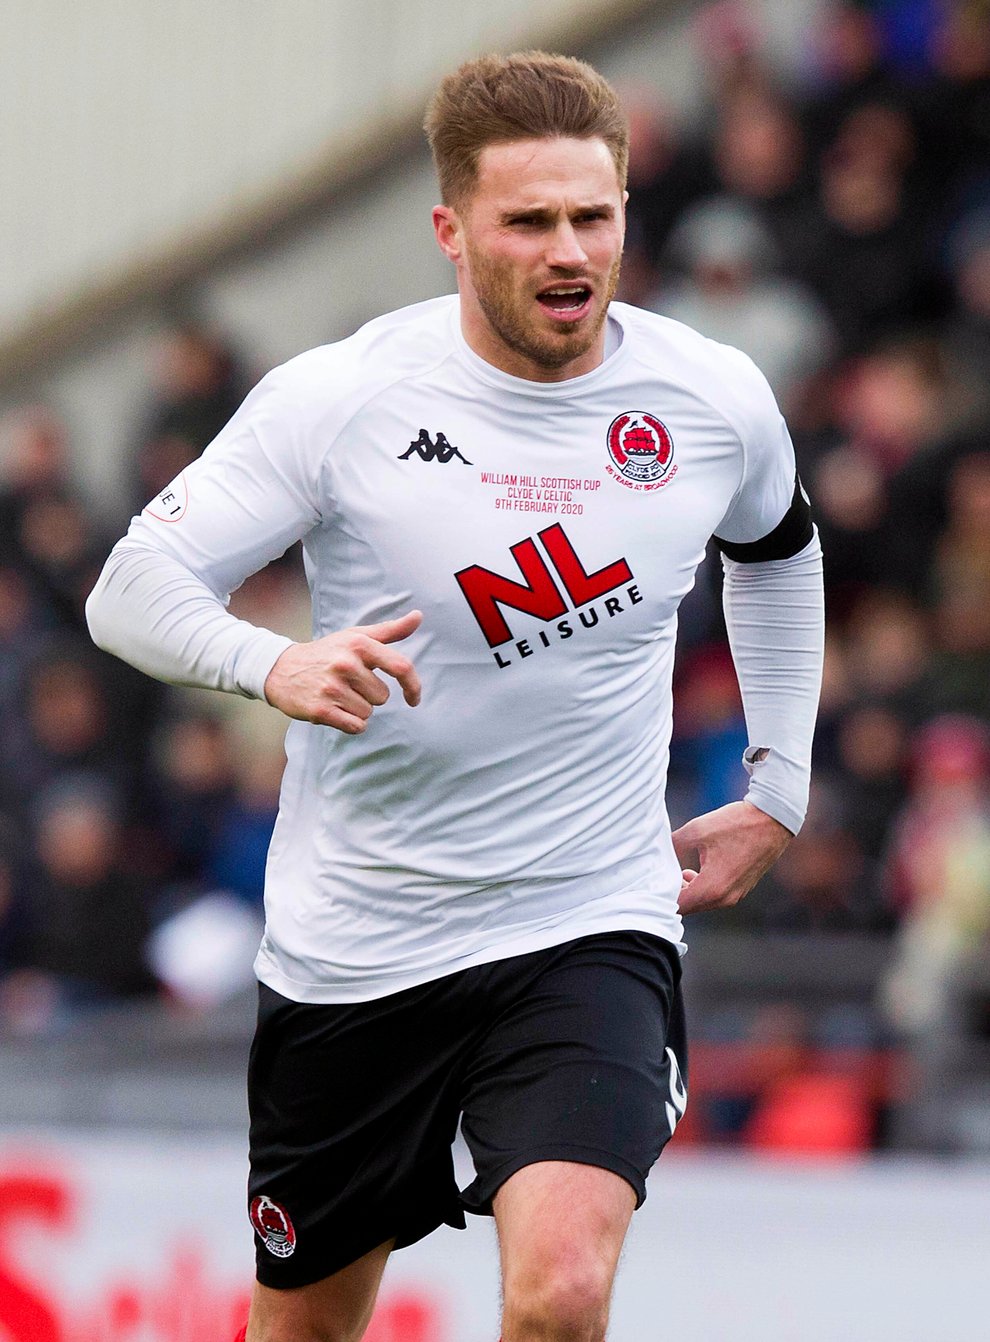 Raith Rovers’ decision to sign David Goodwillie has prompted an angry backlash (Jeff Holmes/PA)